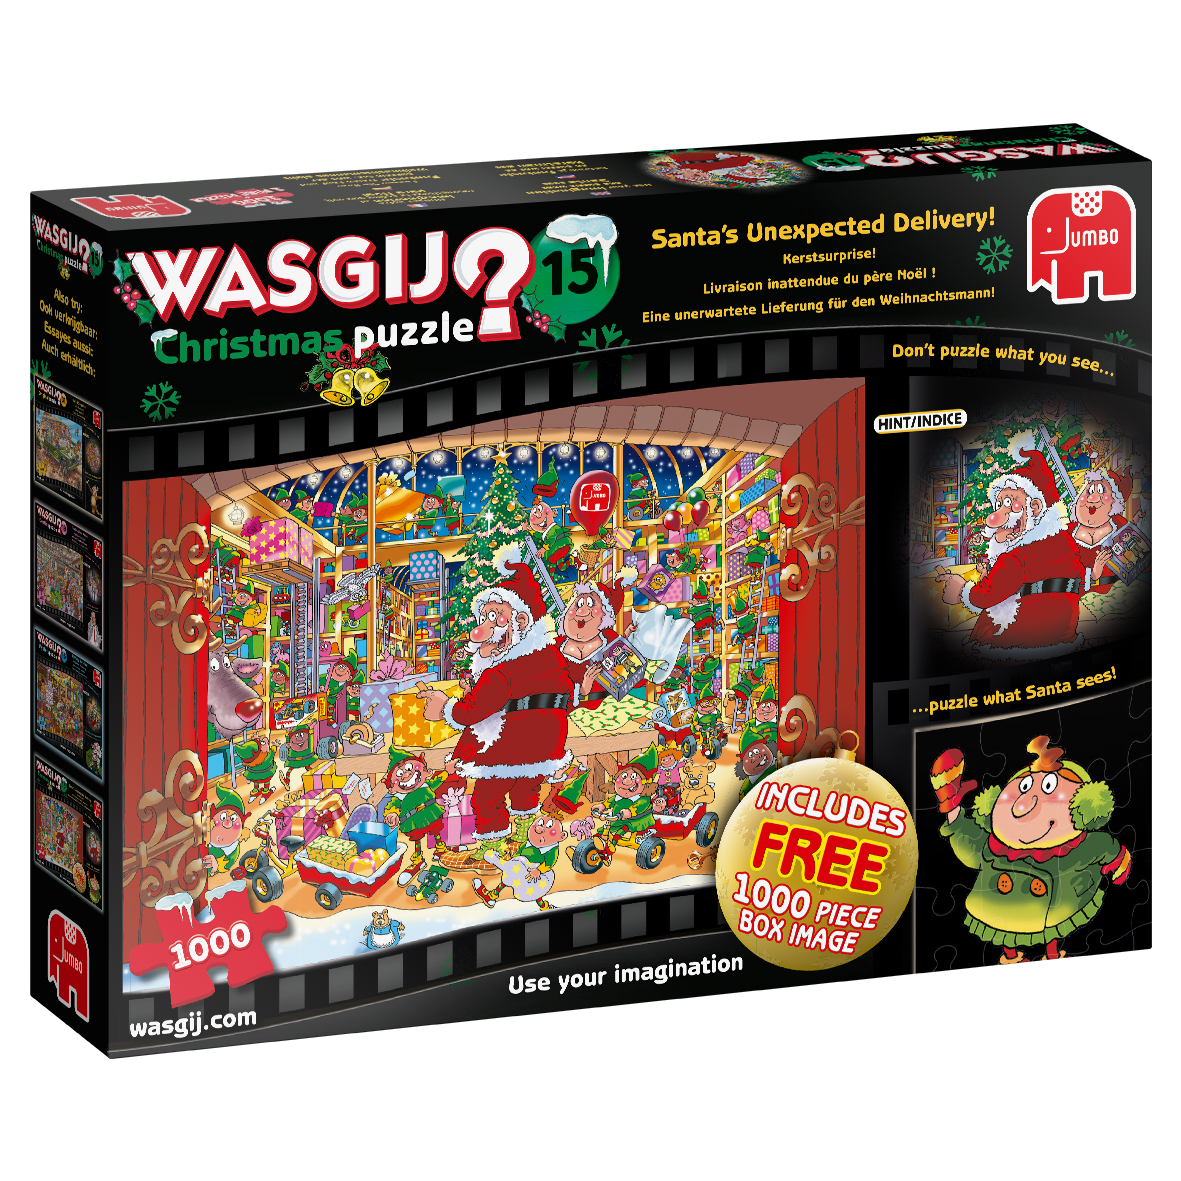 Wasgij Christmas 2019 - 15 'Santa's Unexpected Delivery!' 1000 Piece Jigsaw Puzzle